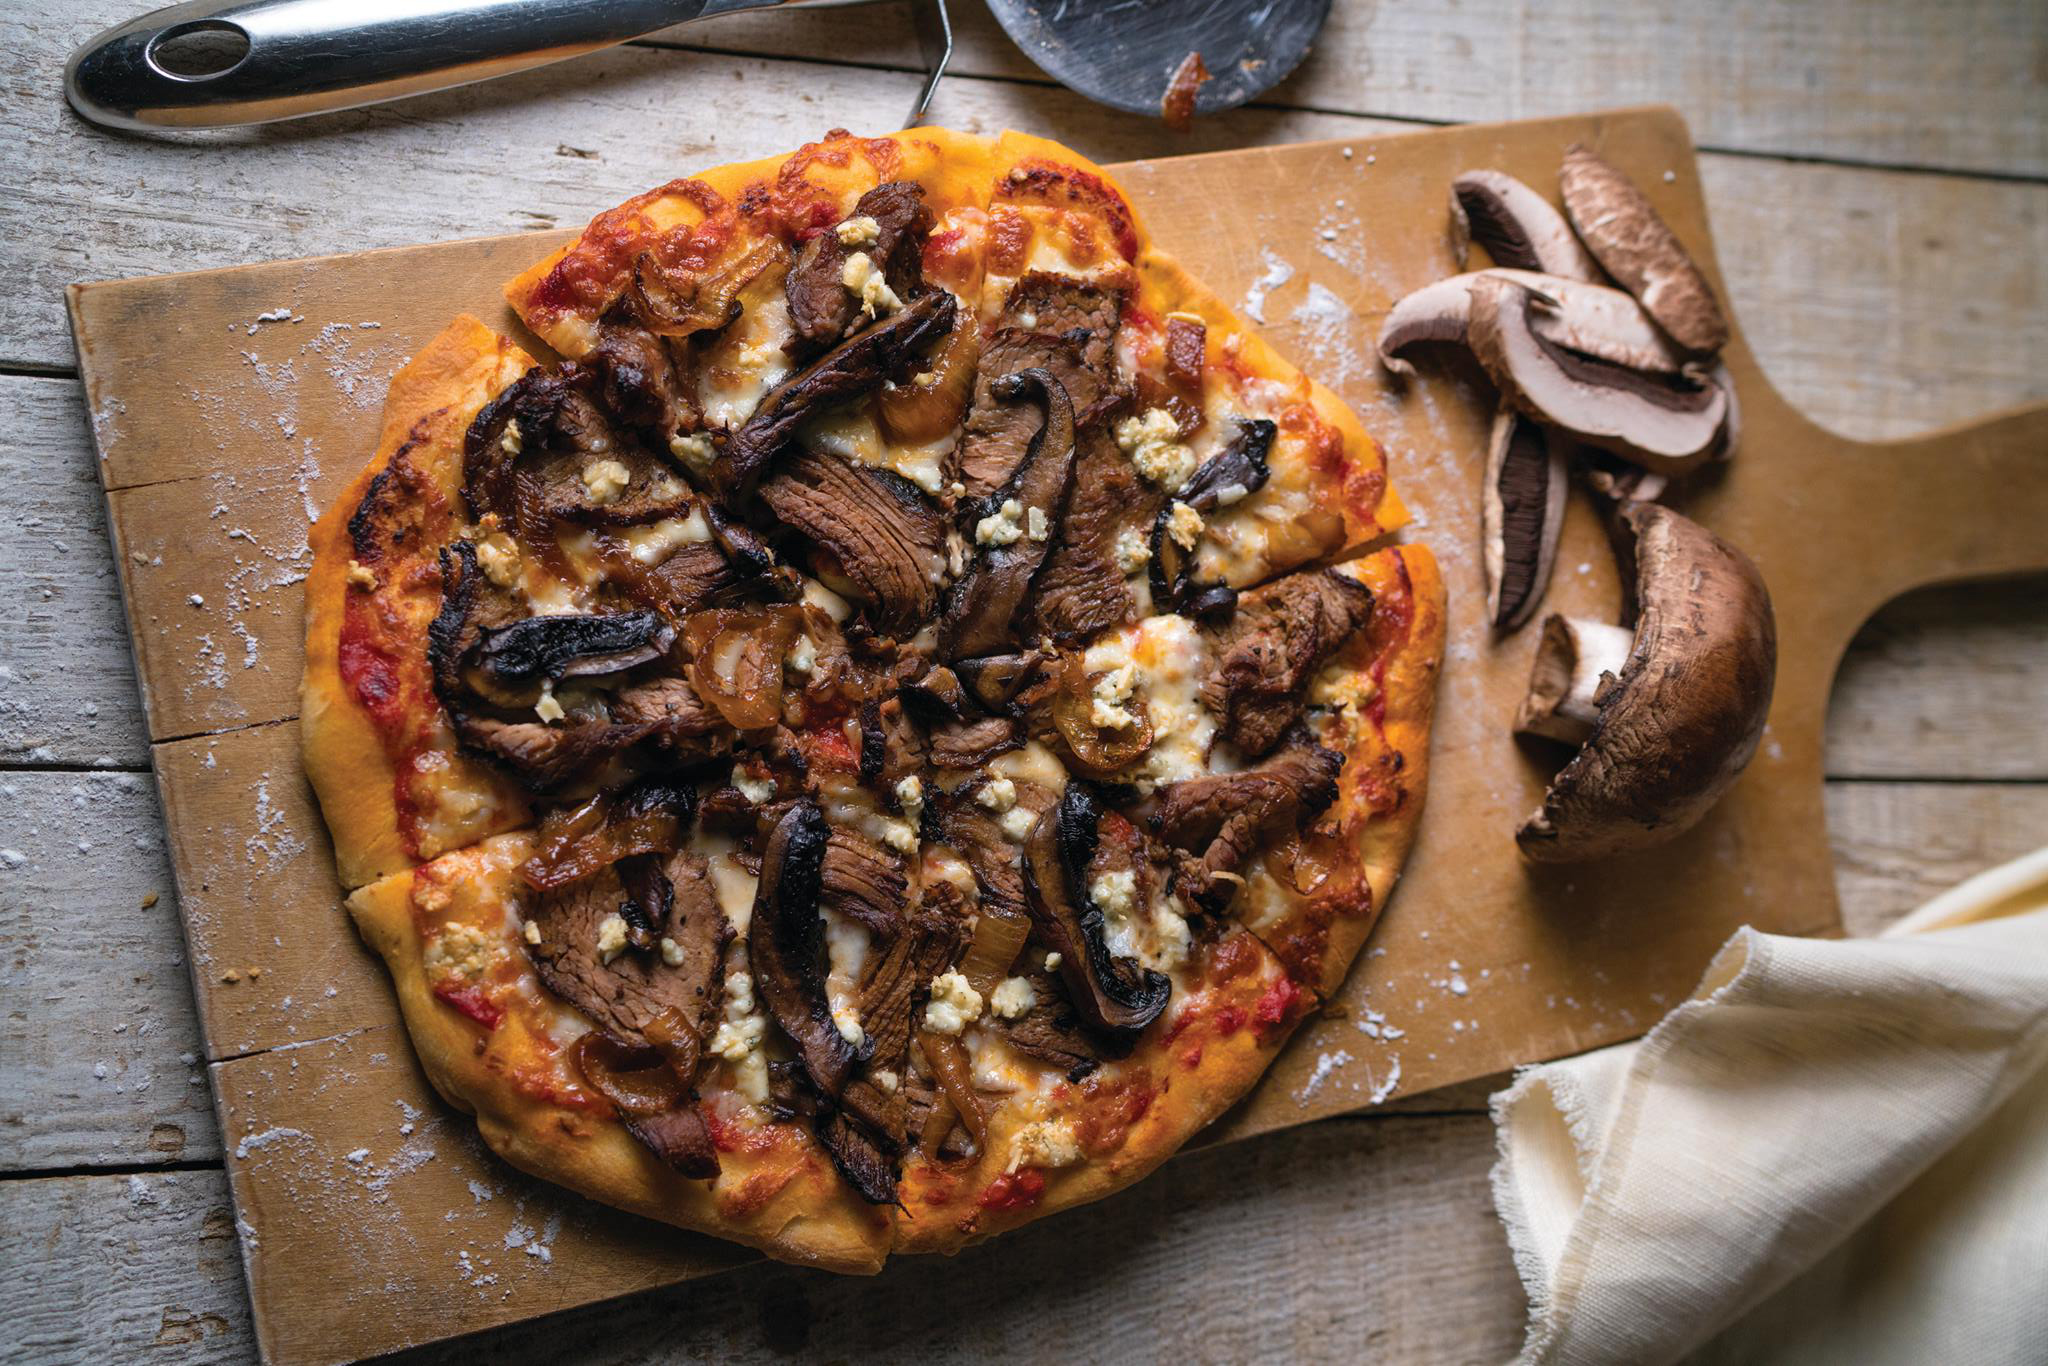 Newk’s Eatery’s grilled steak and mushroom pizza